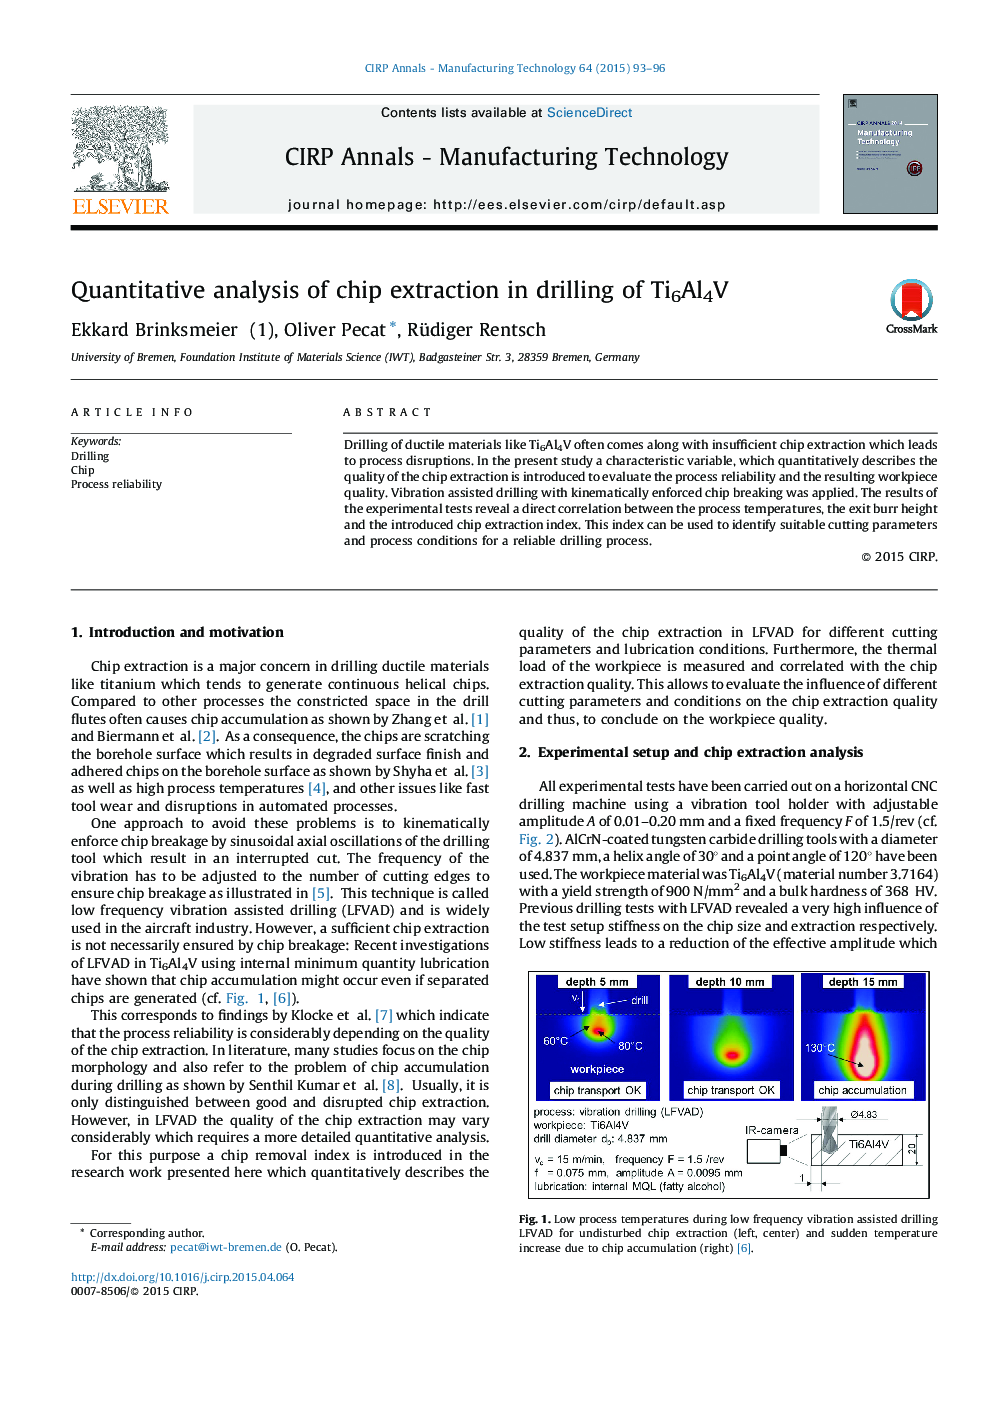 Quantitative analysis of chip extraction in drilling of Ti6Al4V